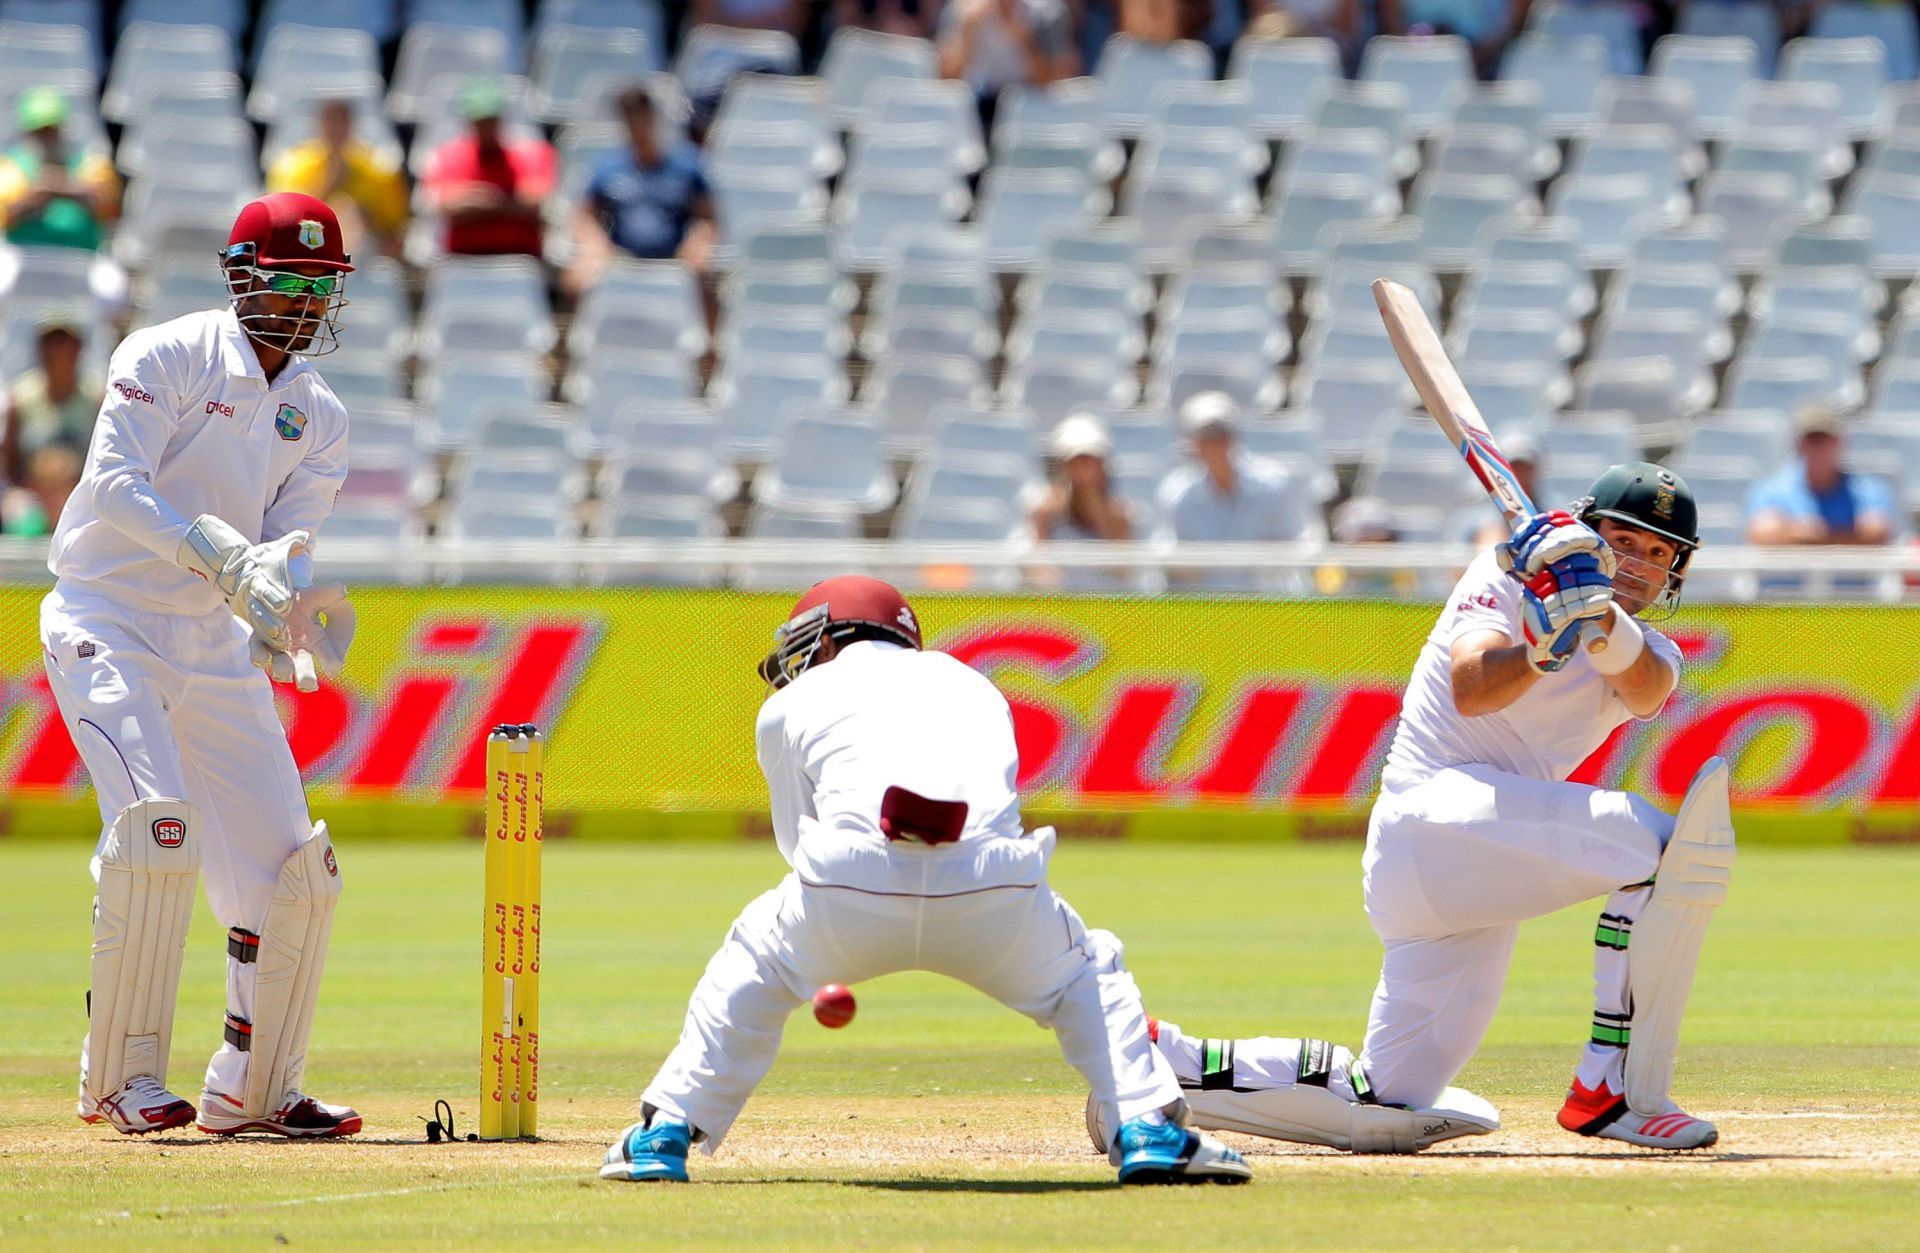 South Africa v West Indies Test Match Series - Third Test Day 5